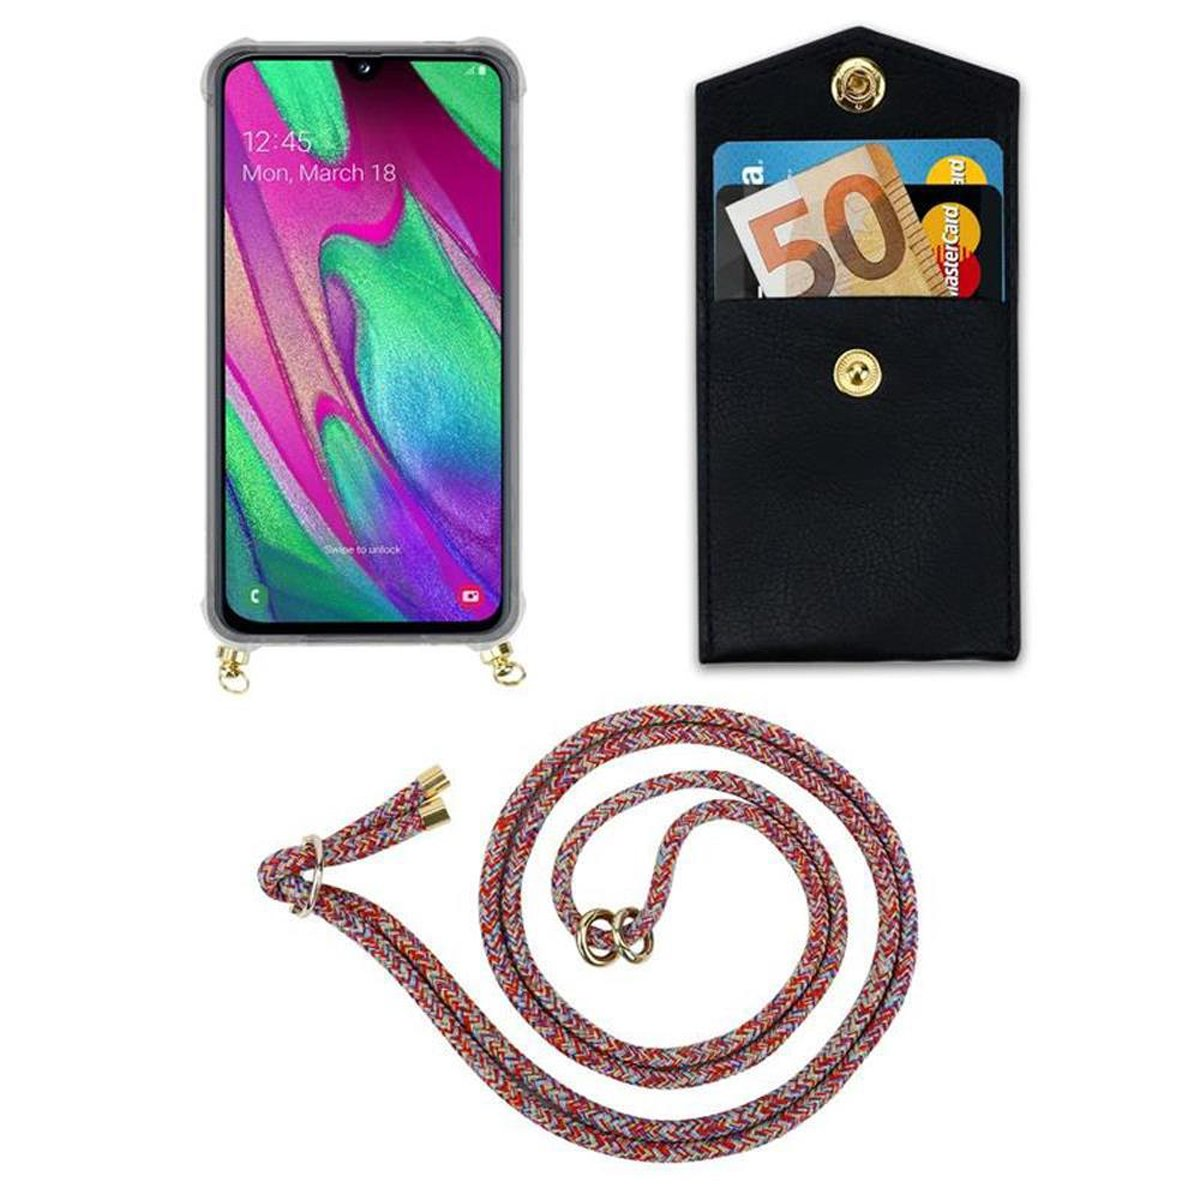 COLORFUL Samsung, abnehmbarer Gold Hülle, Handy und Backcover, Ringen, mit A40, PARROT Kette Kordel CADORABO Band Galaxy